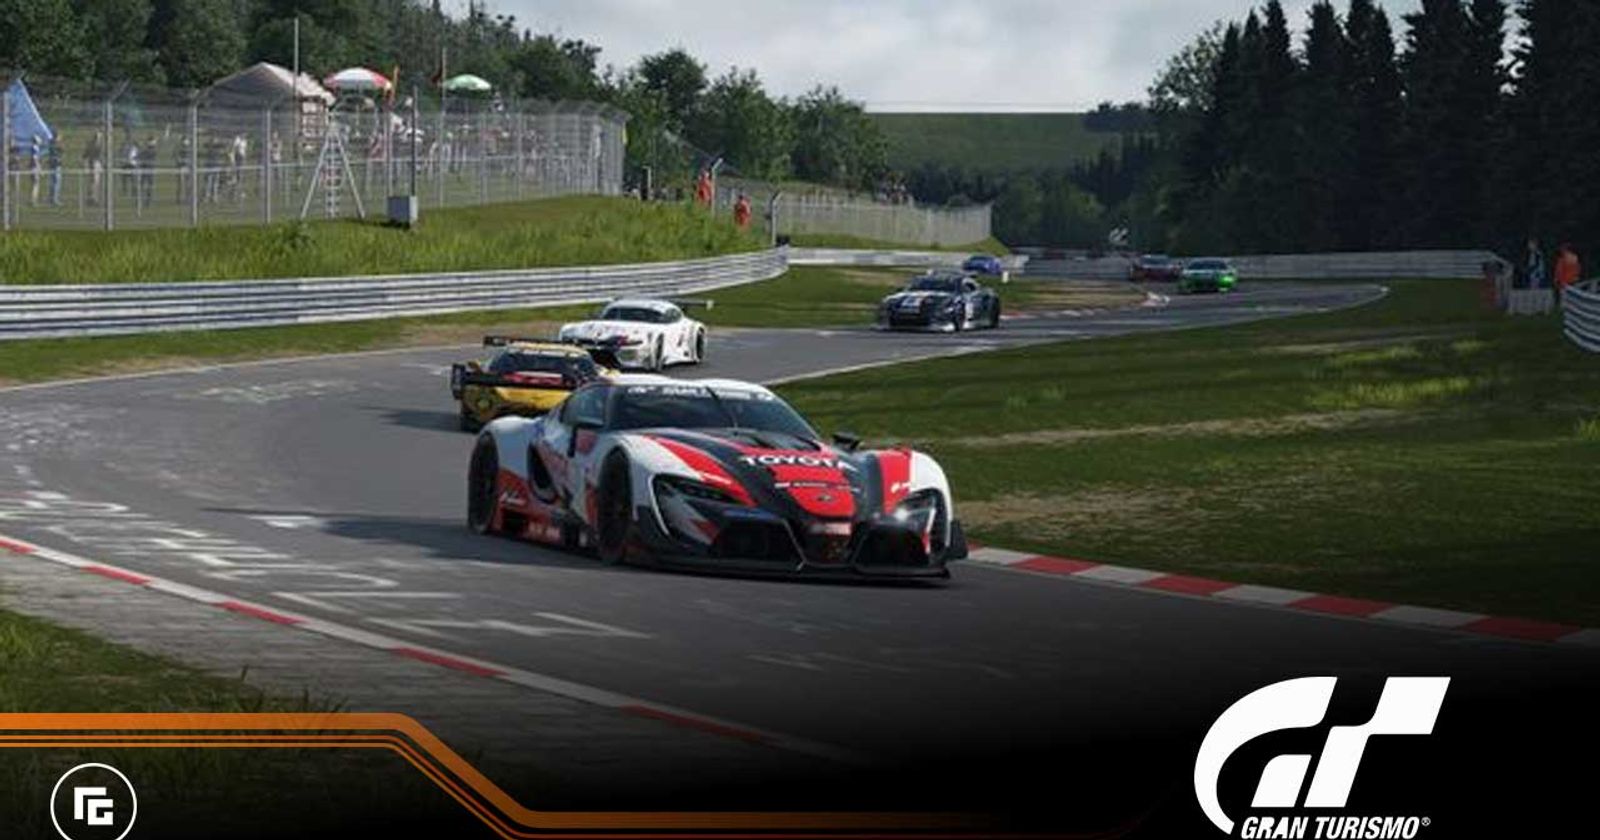 Gran Turismo' Review: Puts the Audience in the Driver's Seat